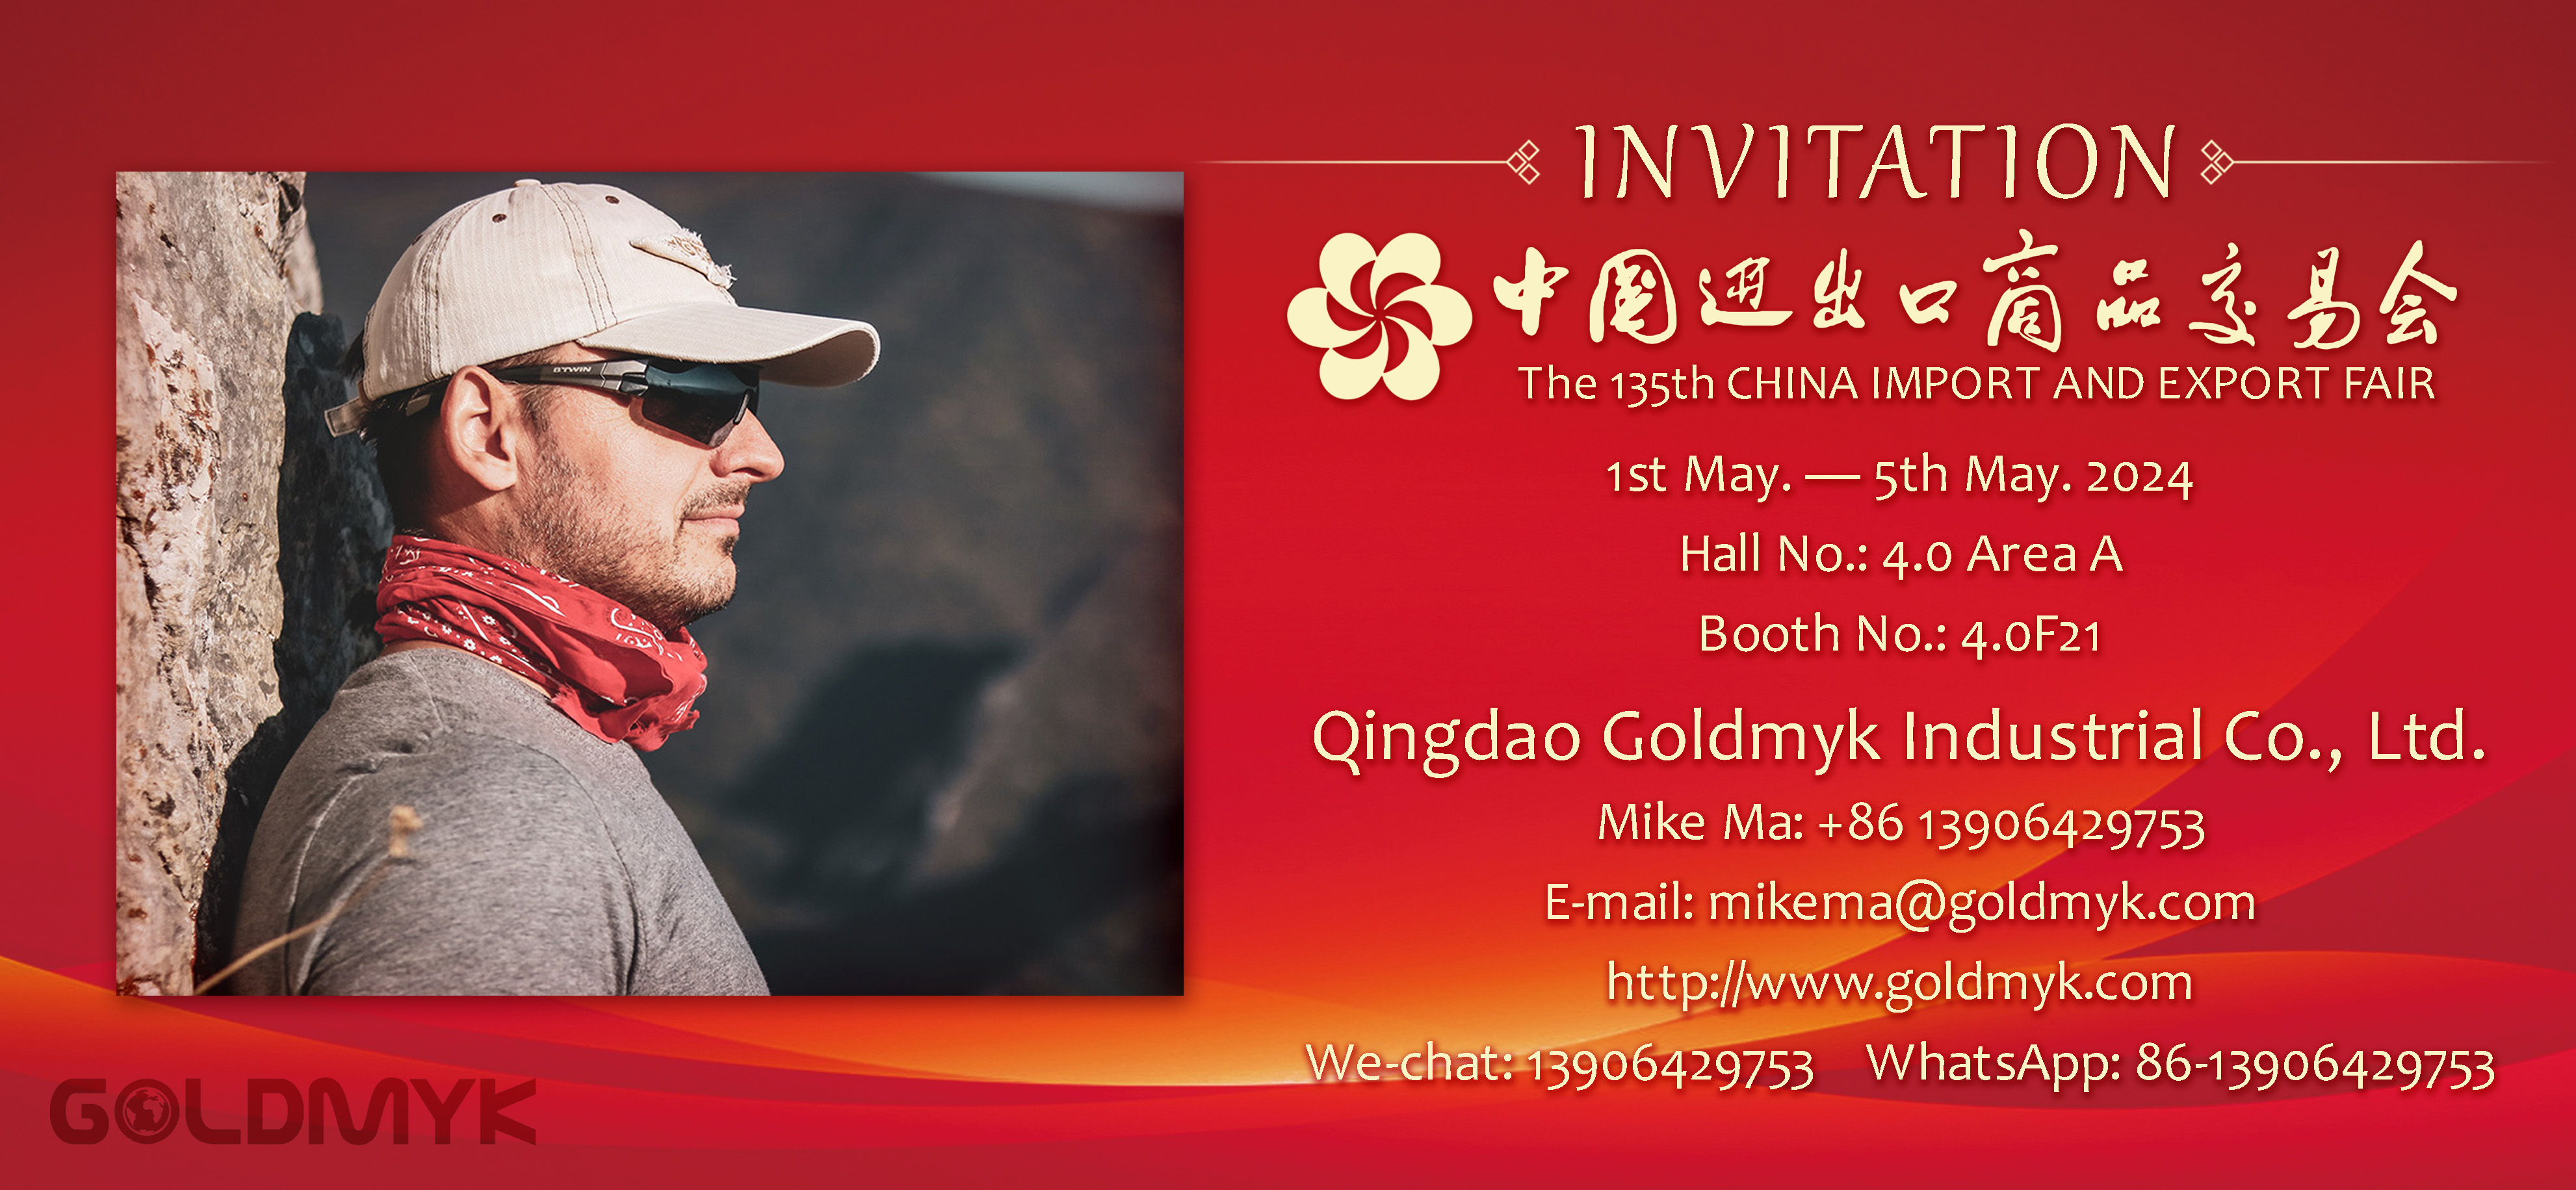 Let's Make An Appointment for The 135th CHINA IMPORT AND EXPORT FAIR from 1st May -- 5th May - Goldmyk 